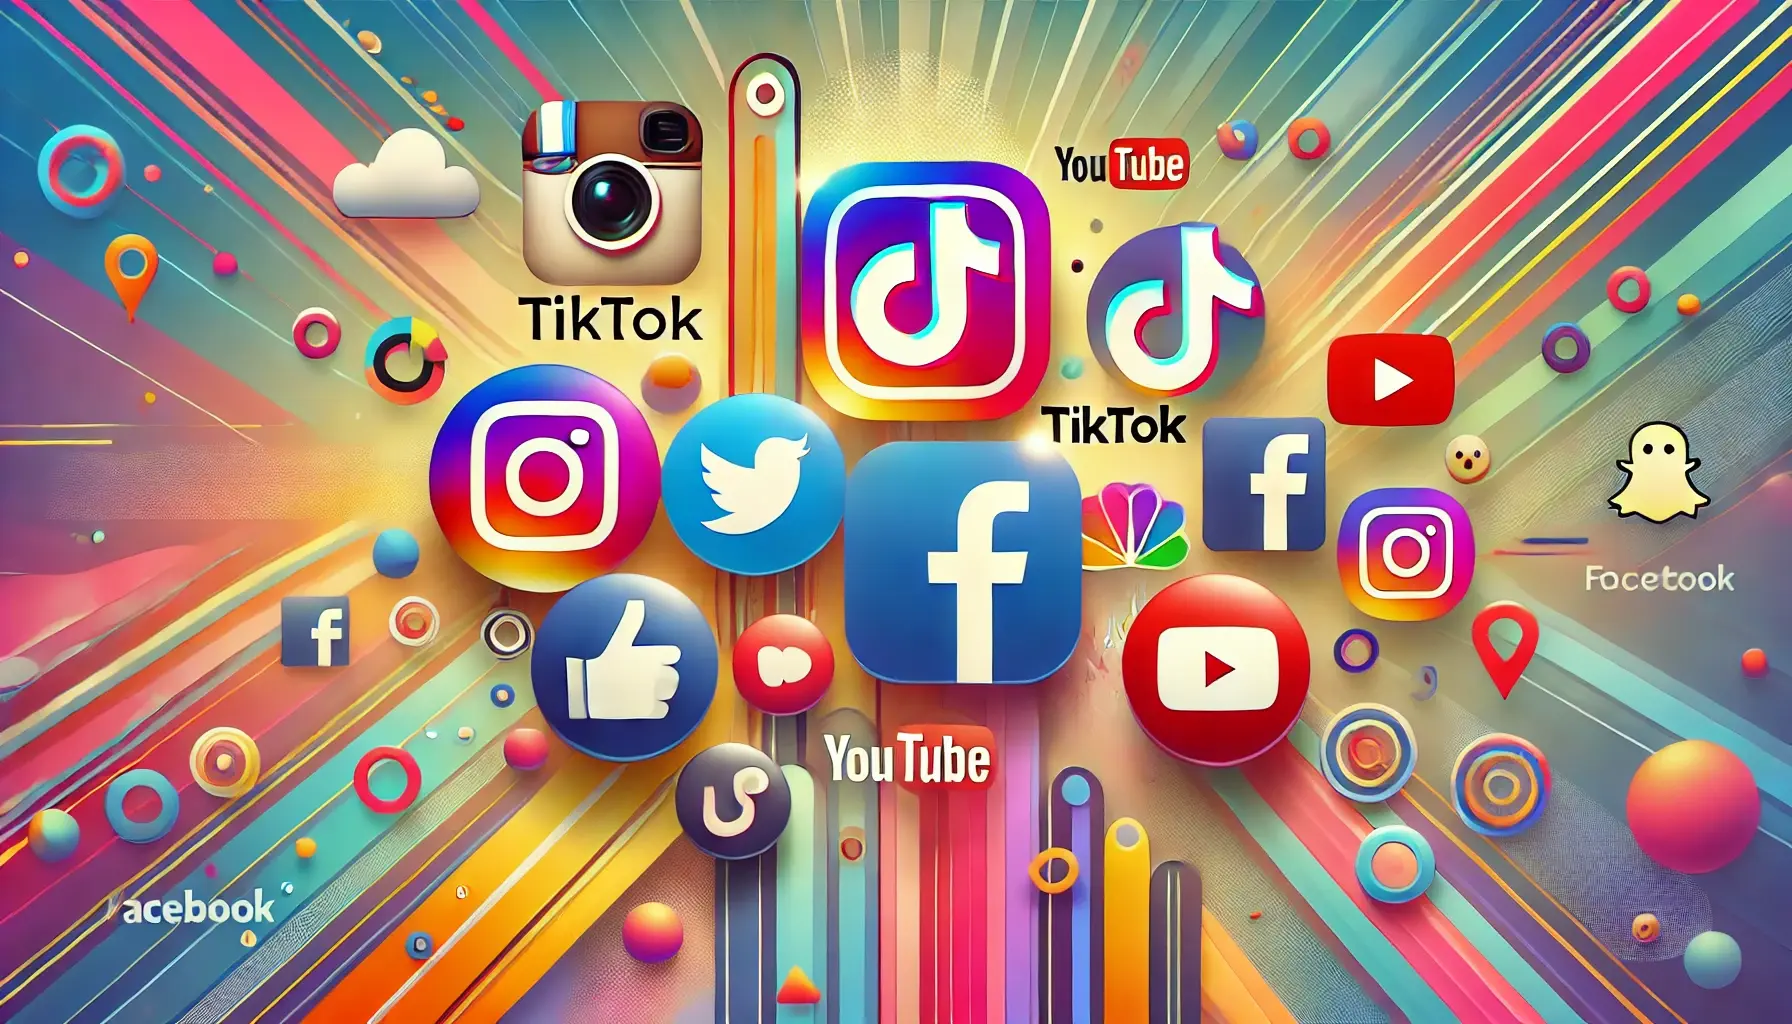 A colorful banner image featuring icons of popular social media platforms such as Instagram, TikTok, YouTube, Facebook, and LinkedIn set against a dynamic background with abstract shapes and gradients, emphasizing millennial engagement and connectivity.